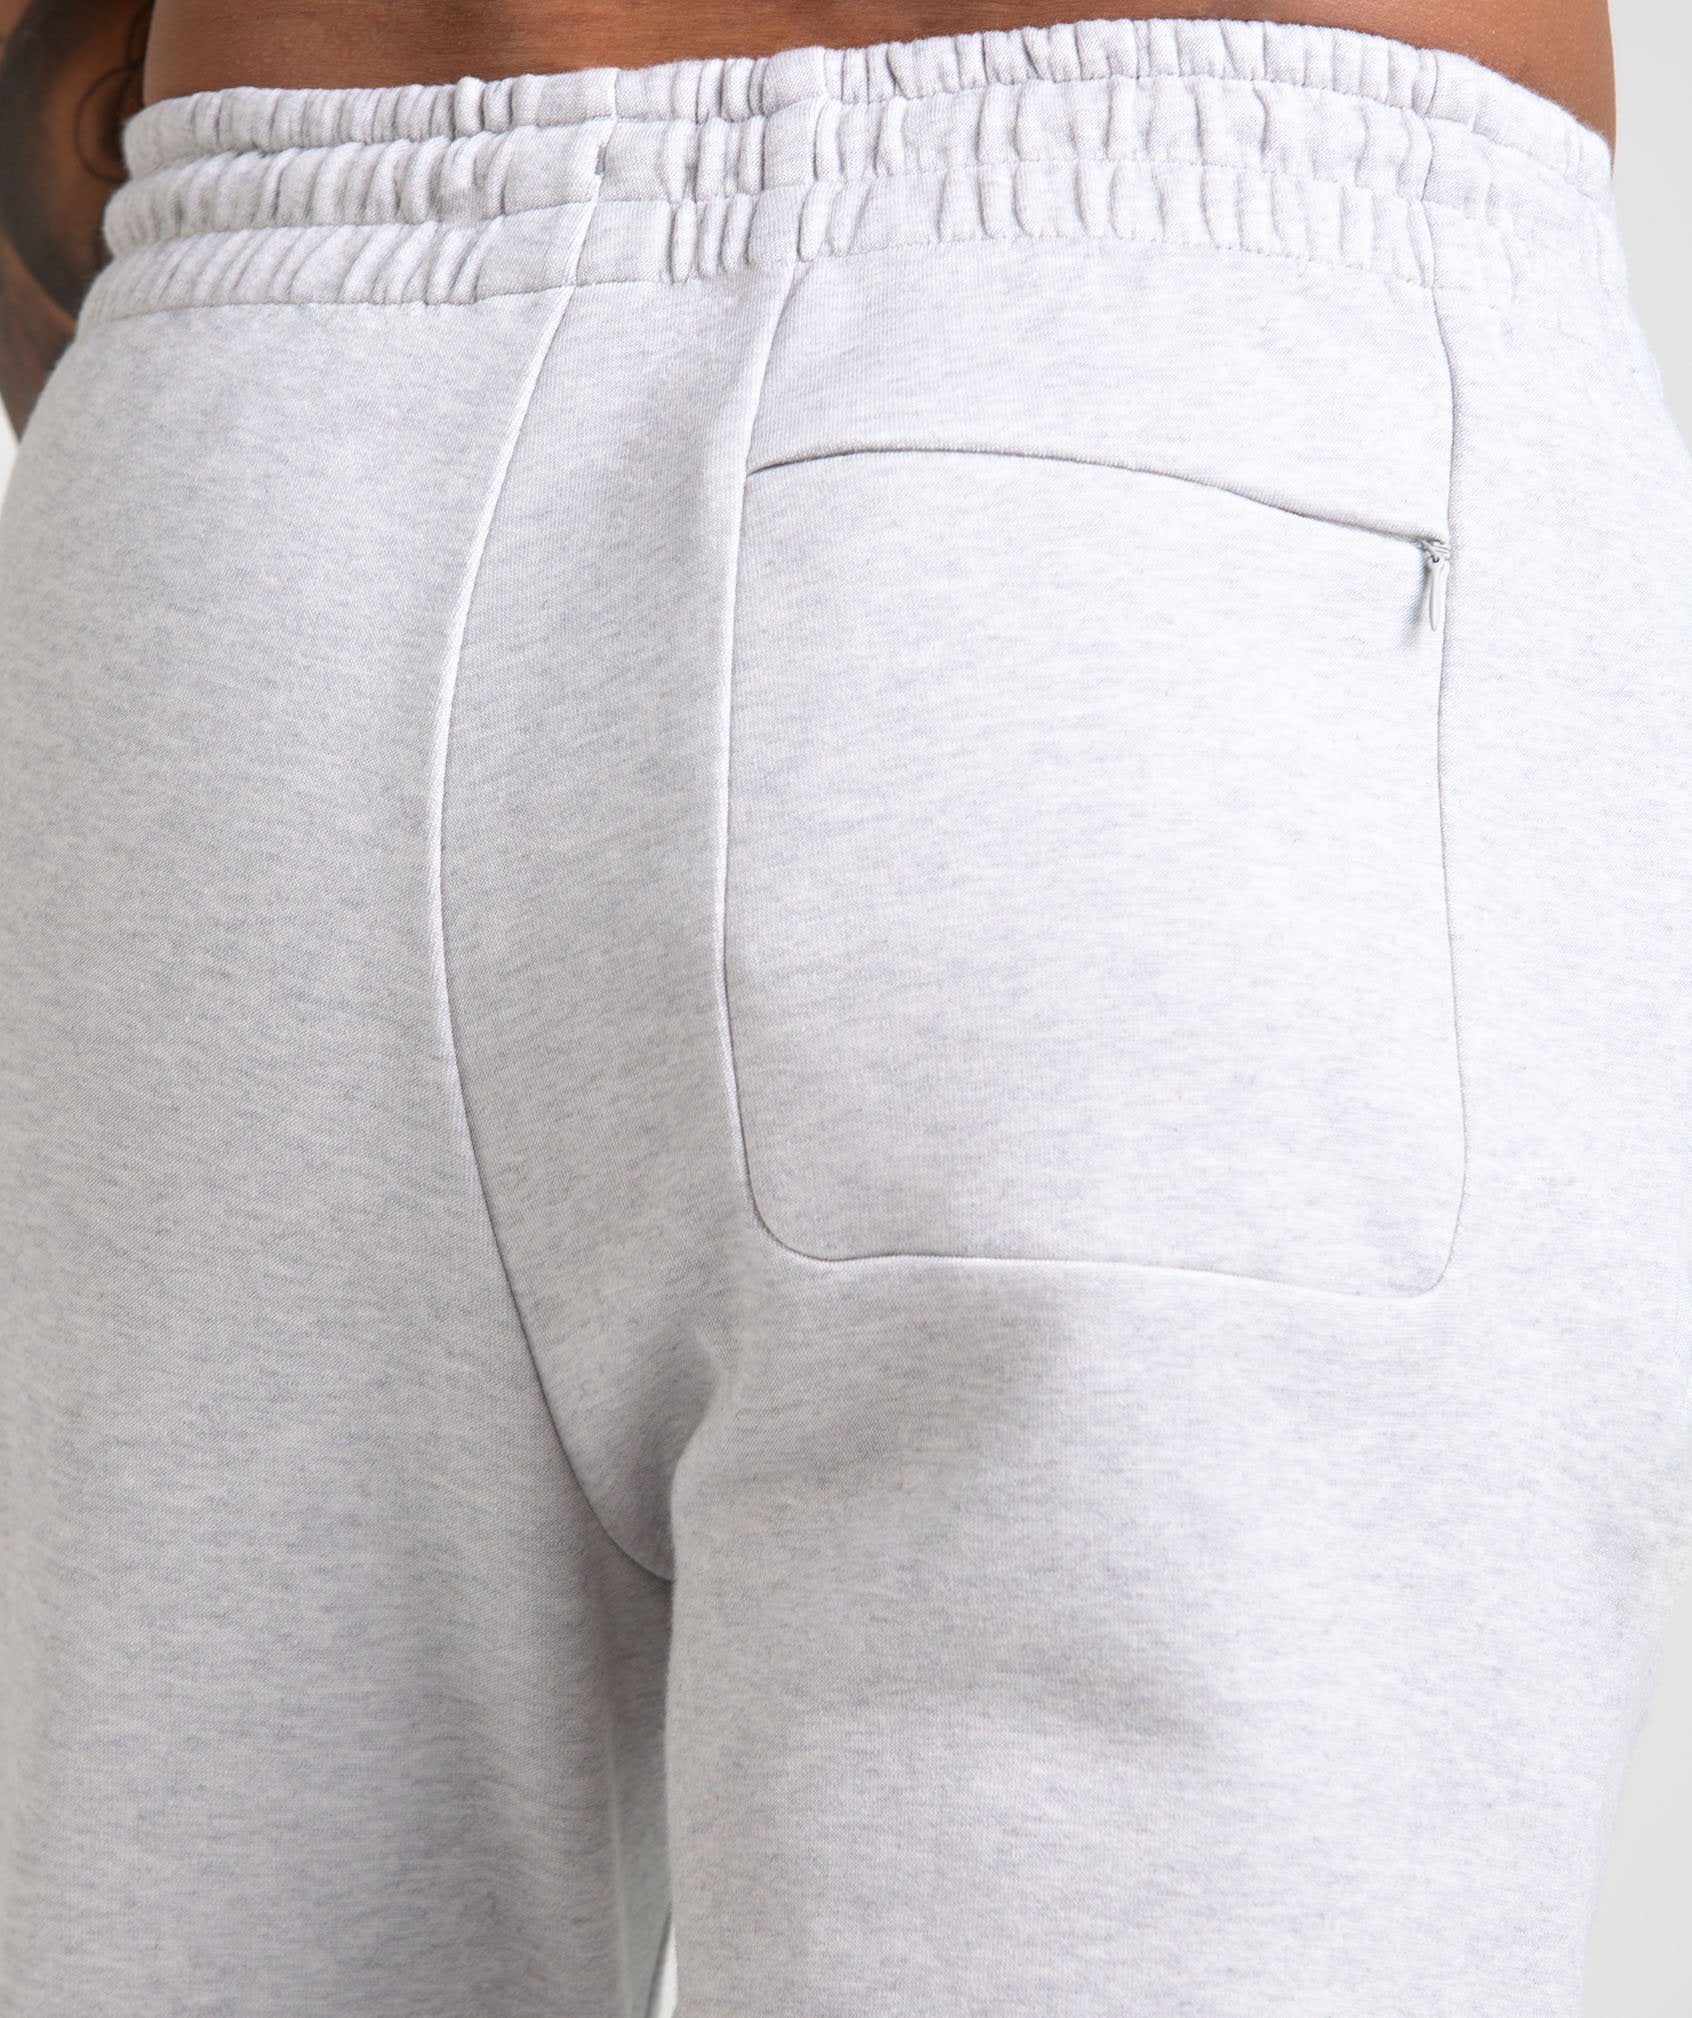 Ozone Bottoms in Light Grey Marl - view 4